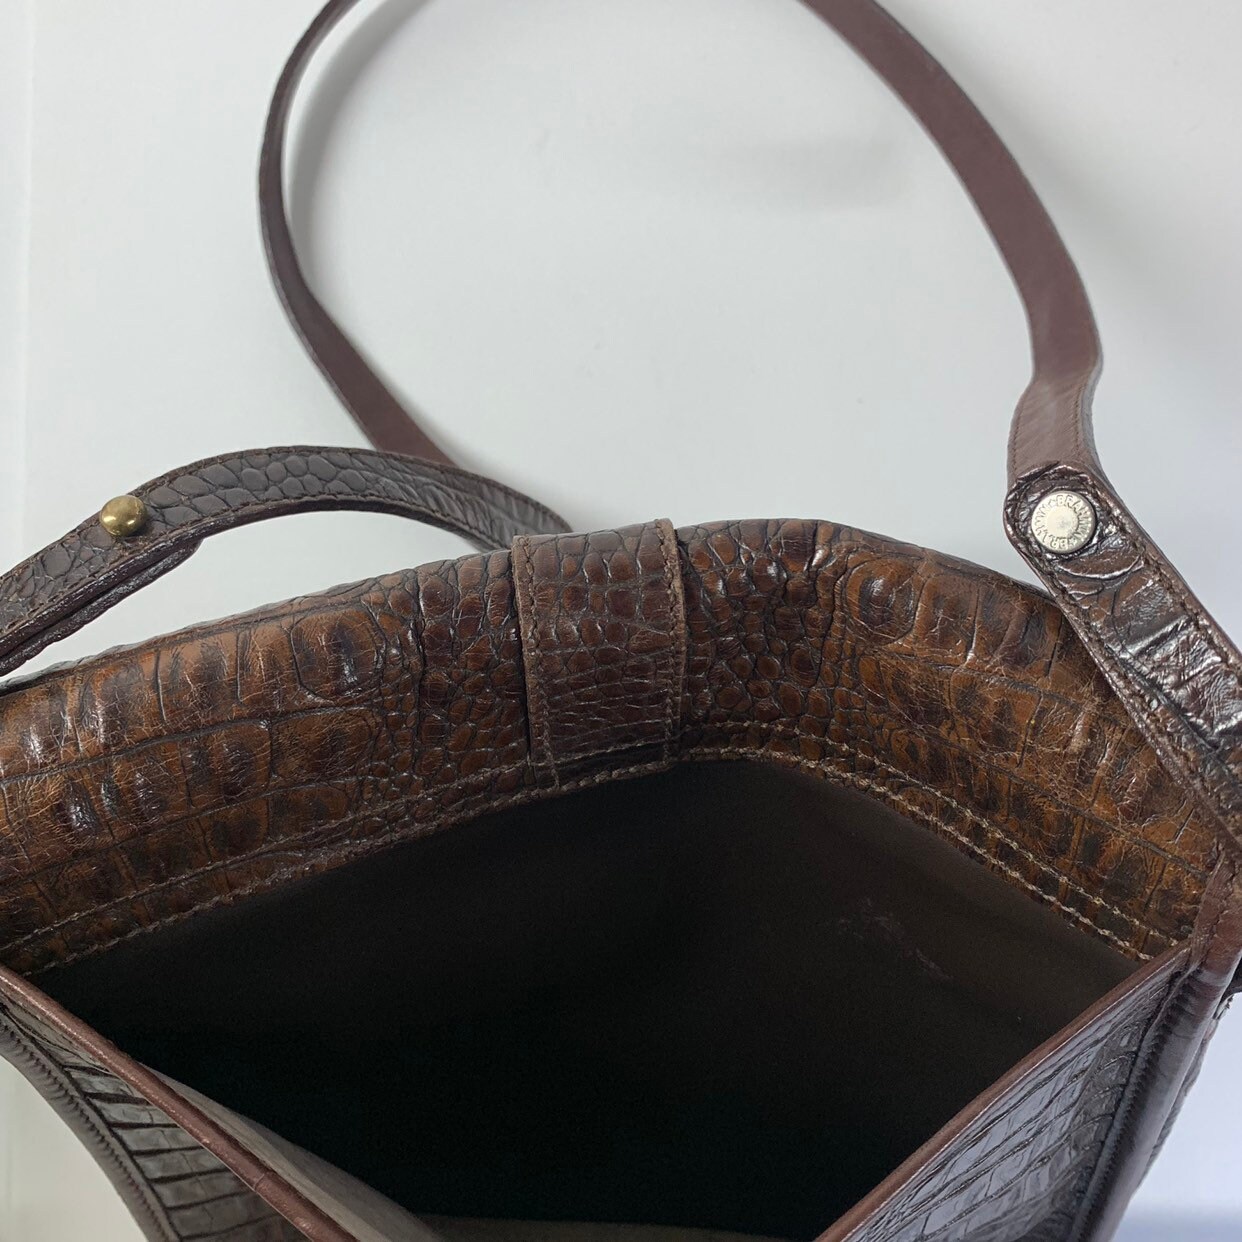 Brahmin - Authenticated Handbag - Leather Brown Crocodile for Women, Very Good Condition